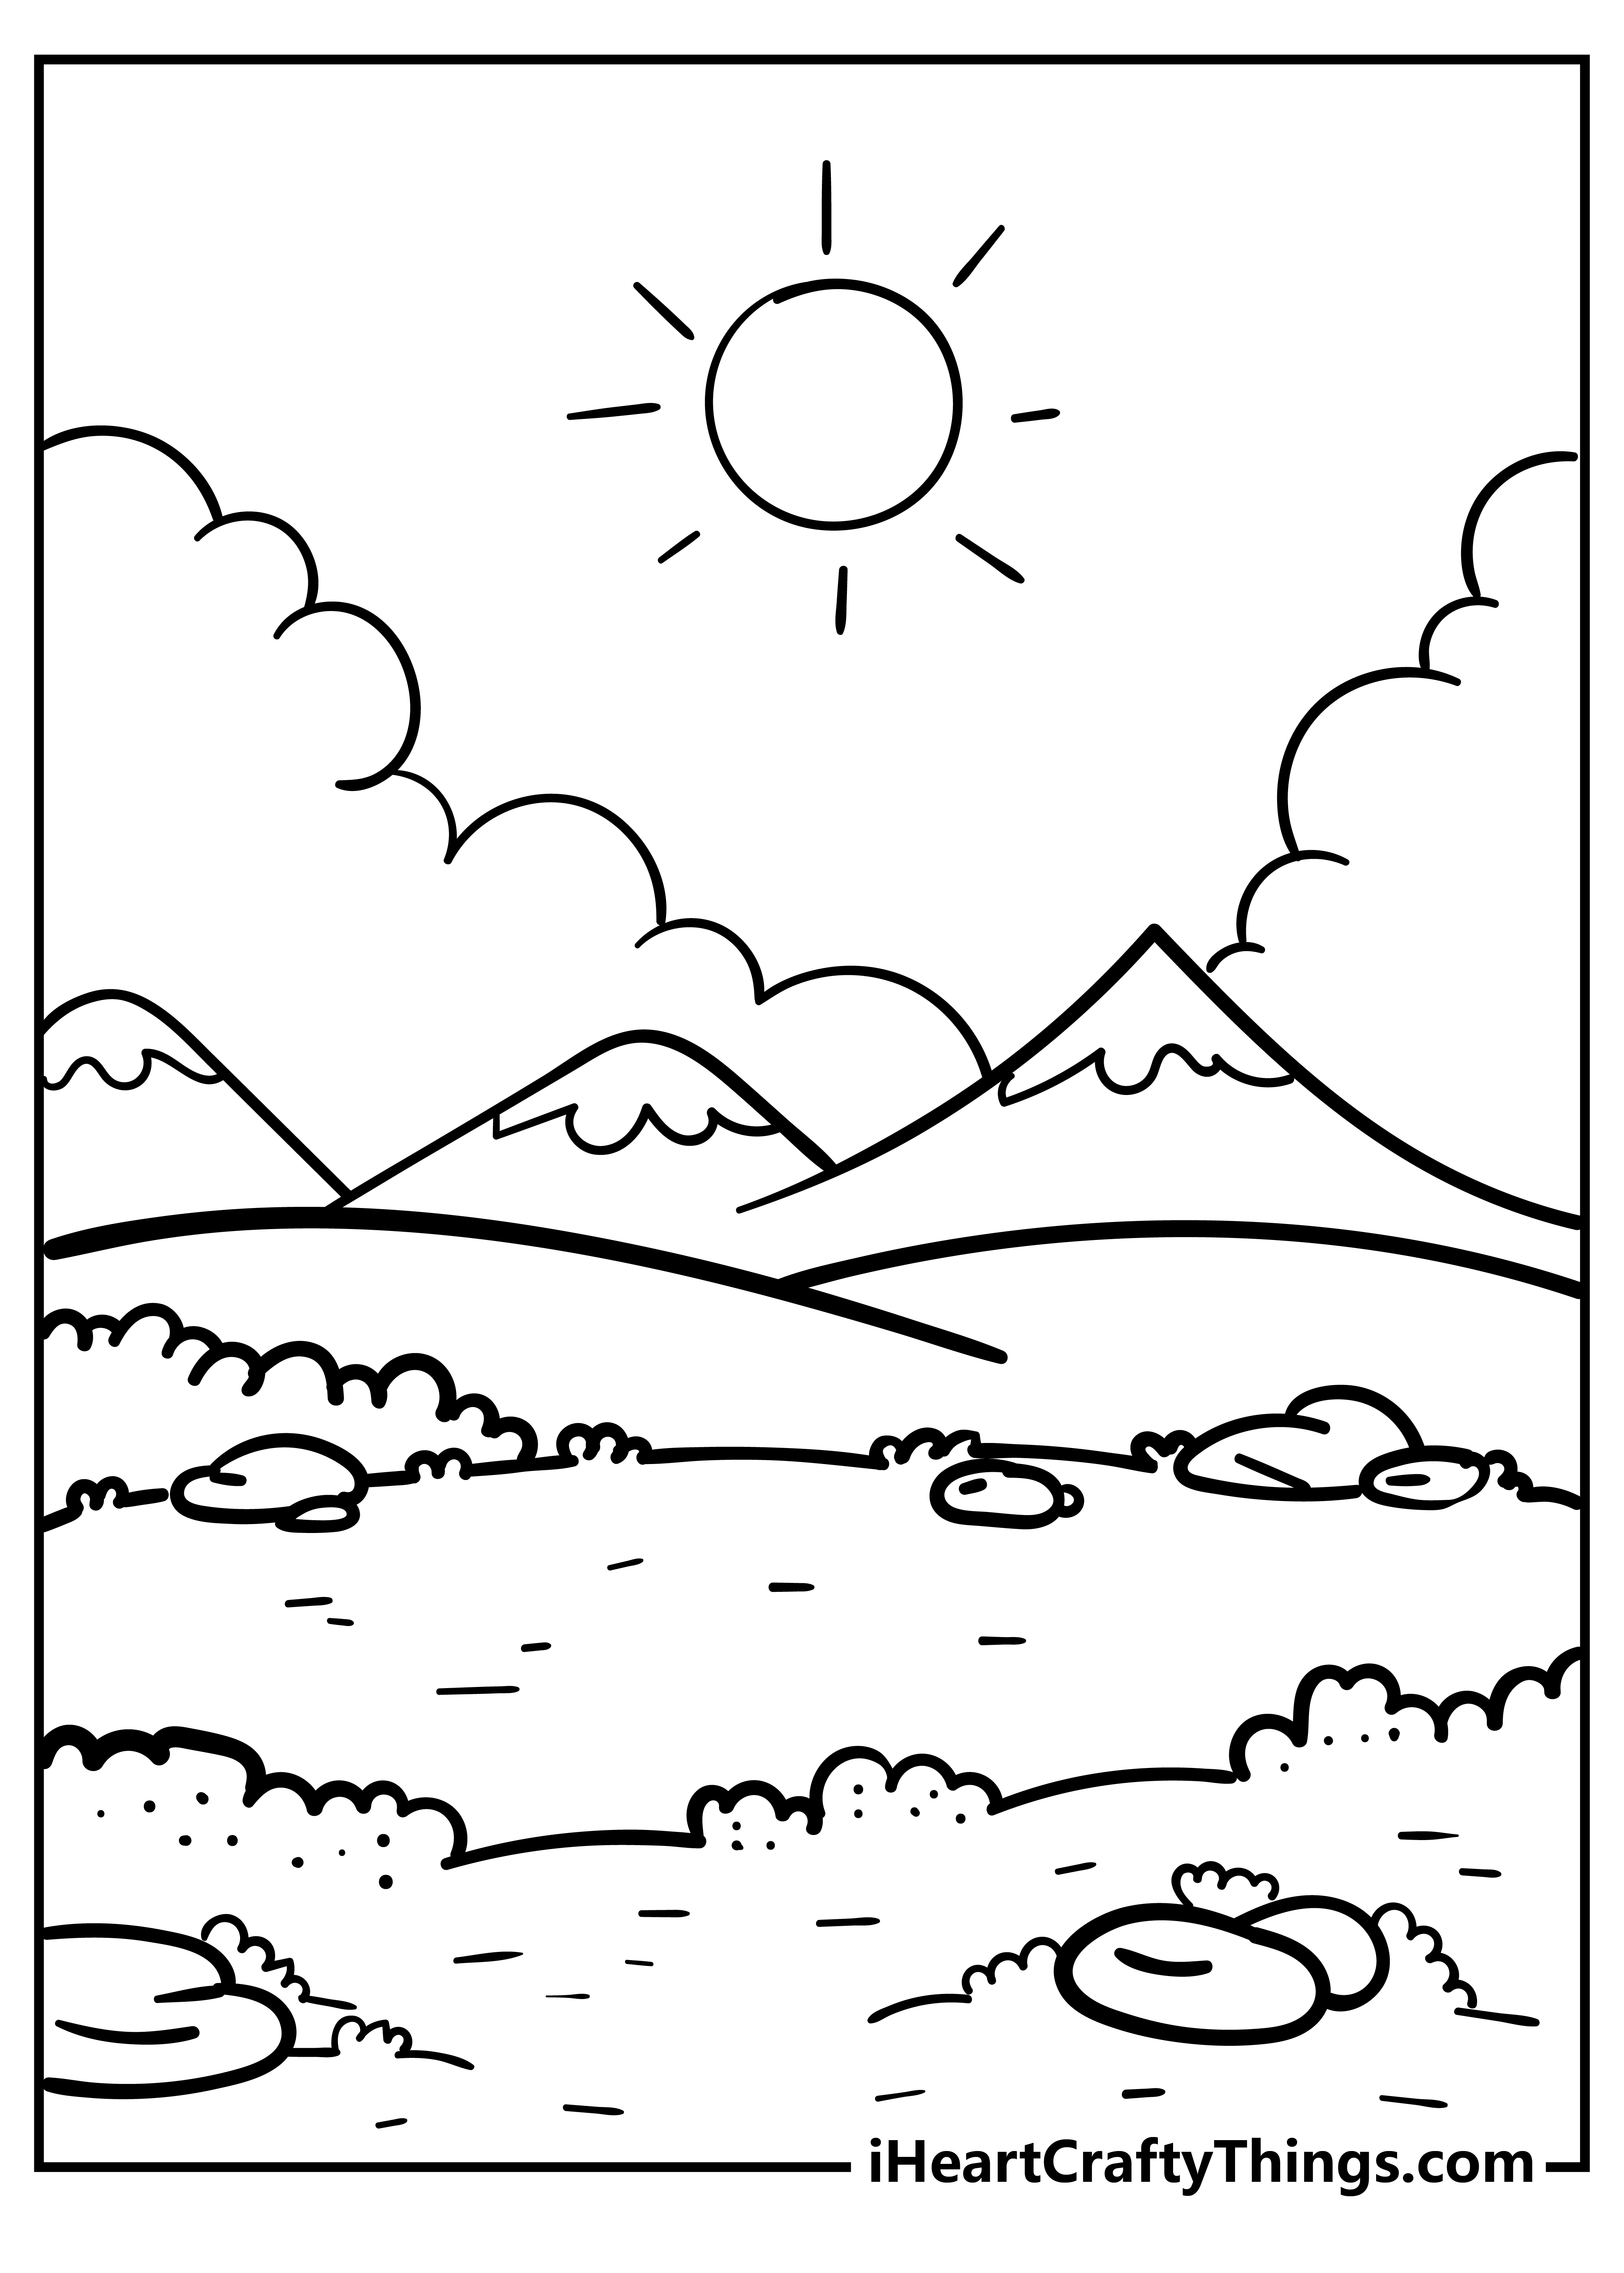 Nature Coloring Sheet for children free download